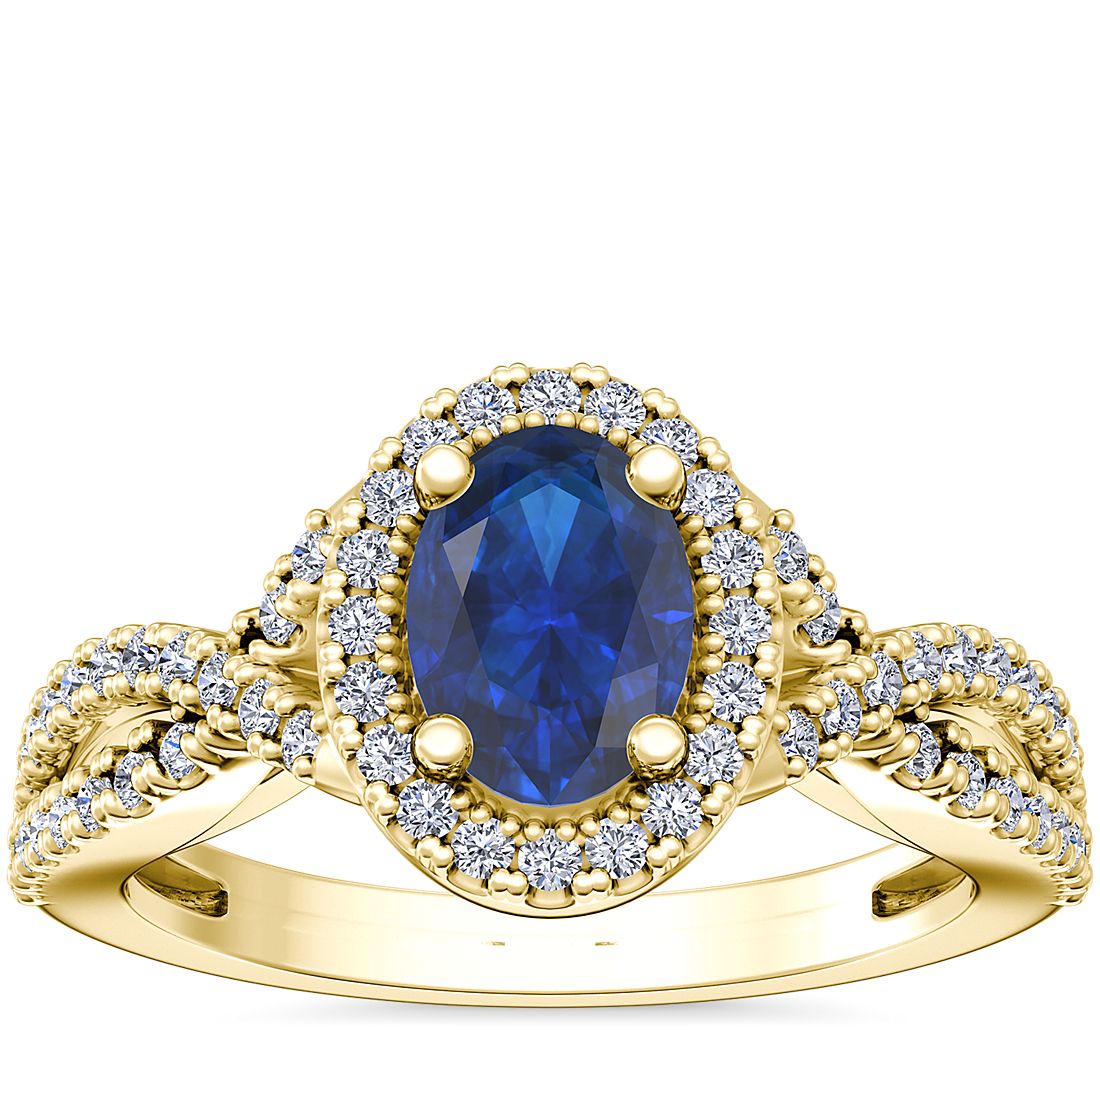 Twist Halo Diamond Engagement Ring with Oval Sapphire in 14k Yellow Gold (7x5mm)